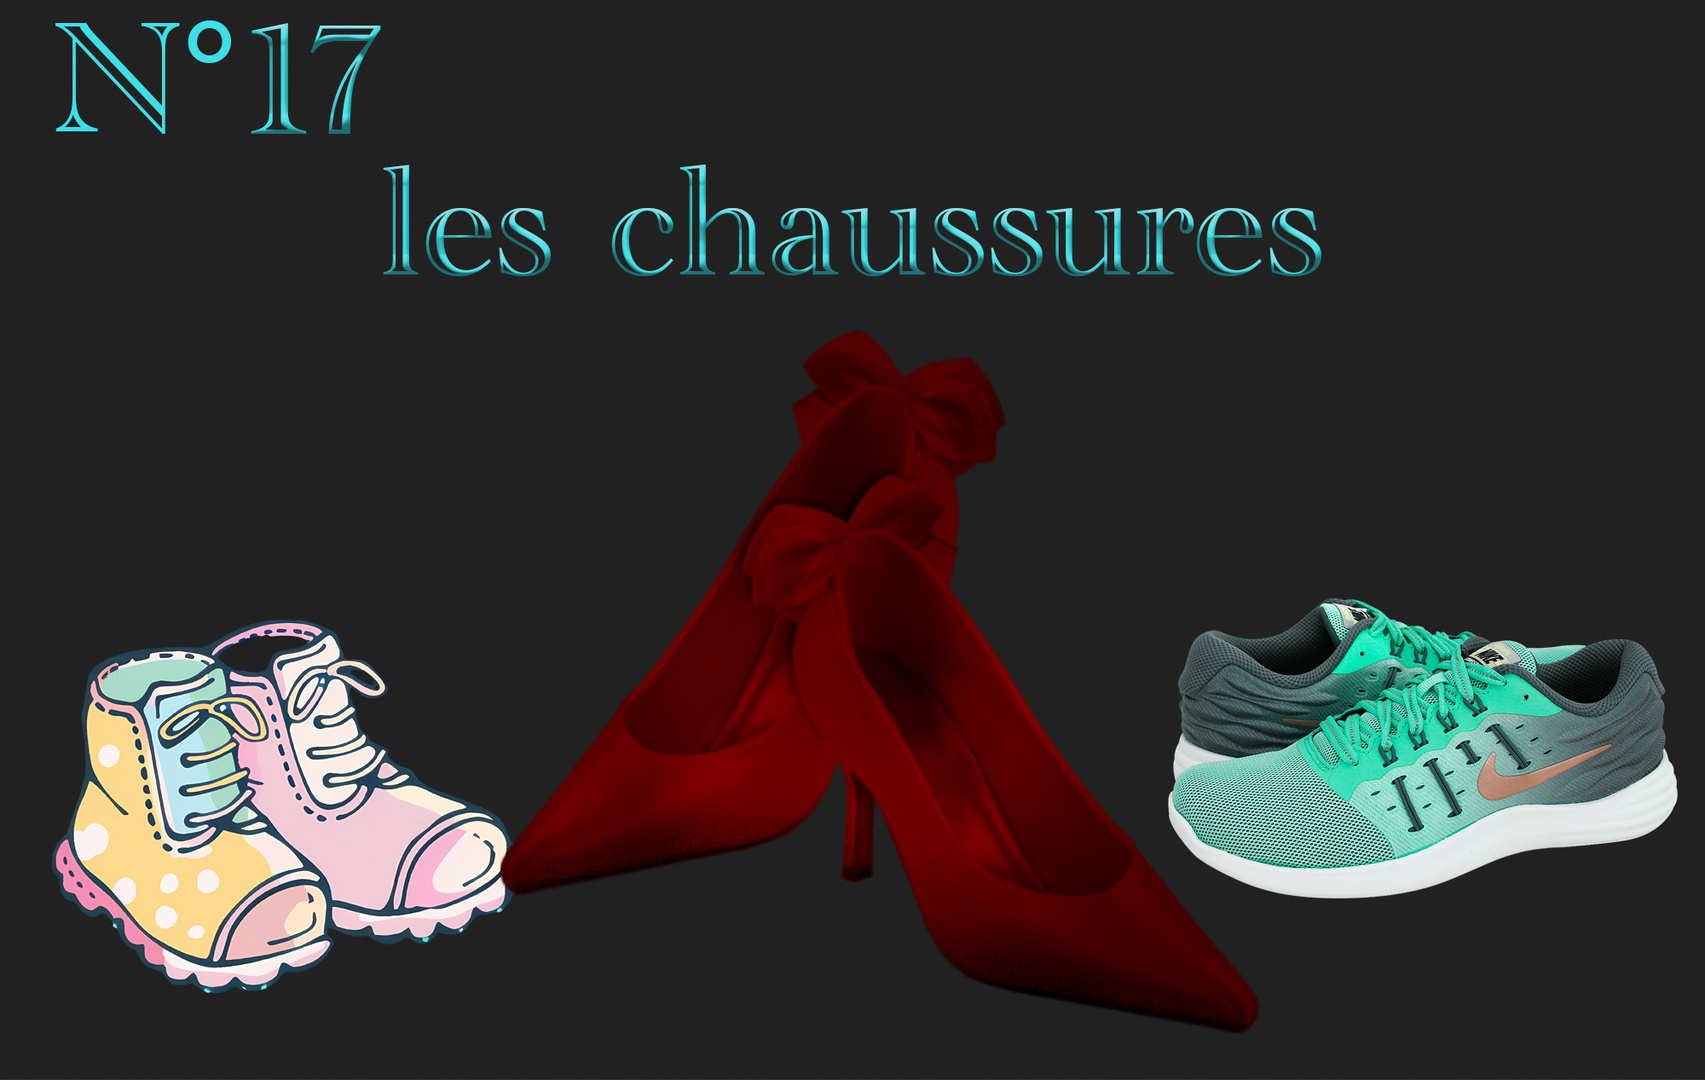 Les chaussures